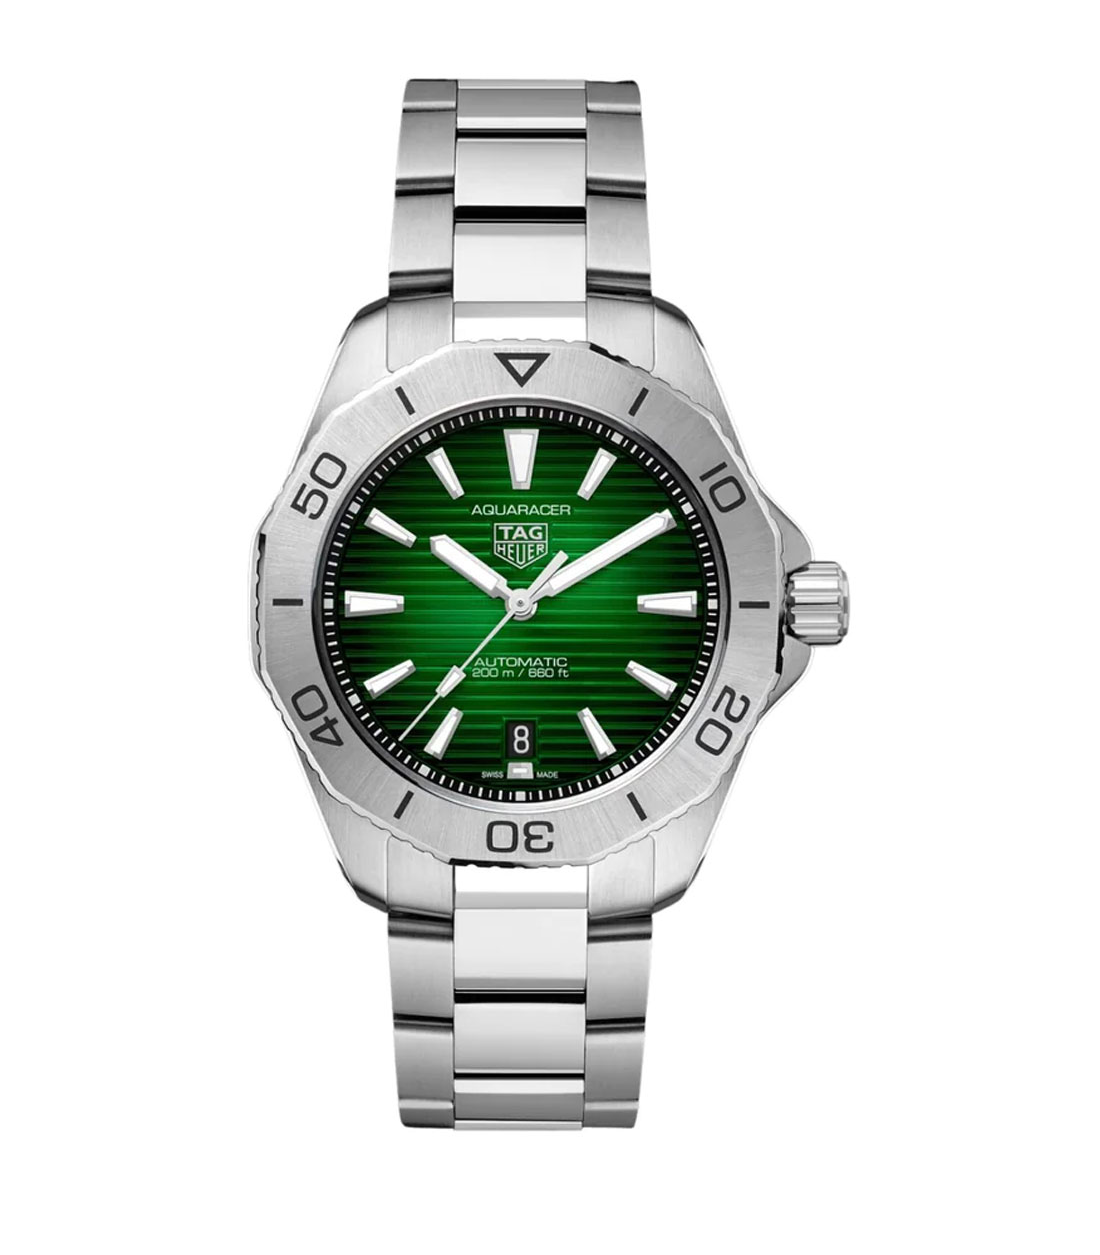 TAG Heuer Aquaracer Professional 200 Watch with a Deep Green Dial